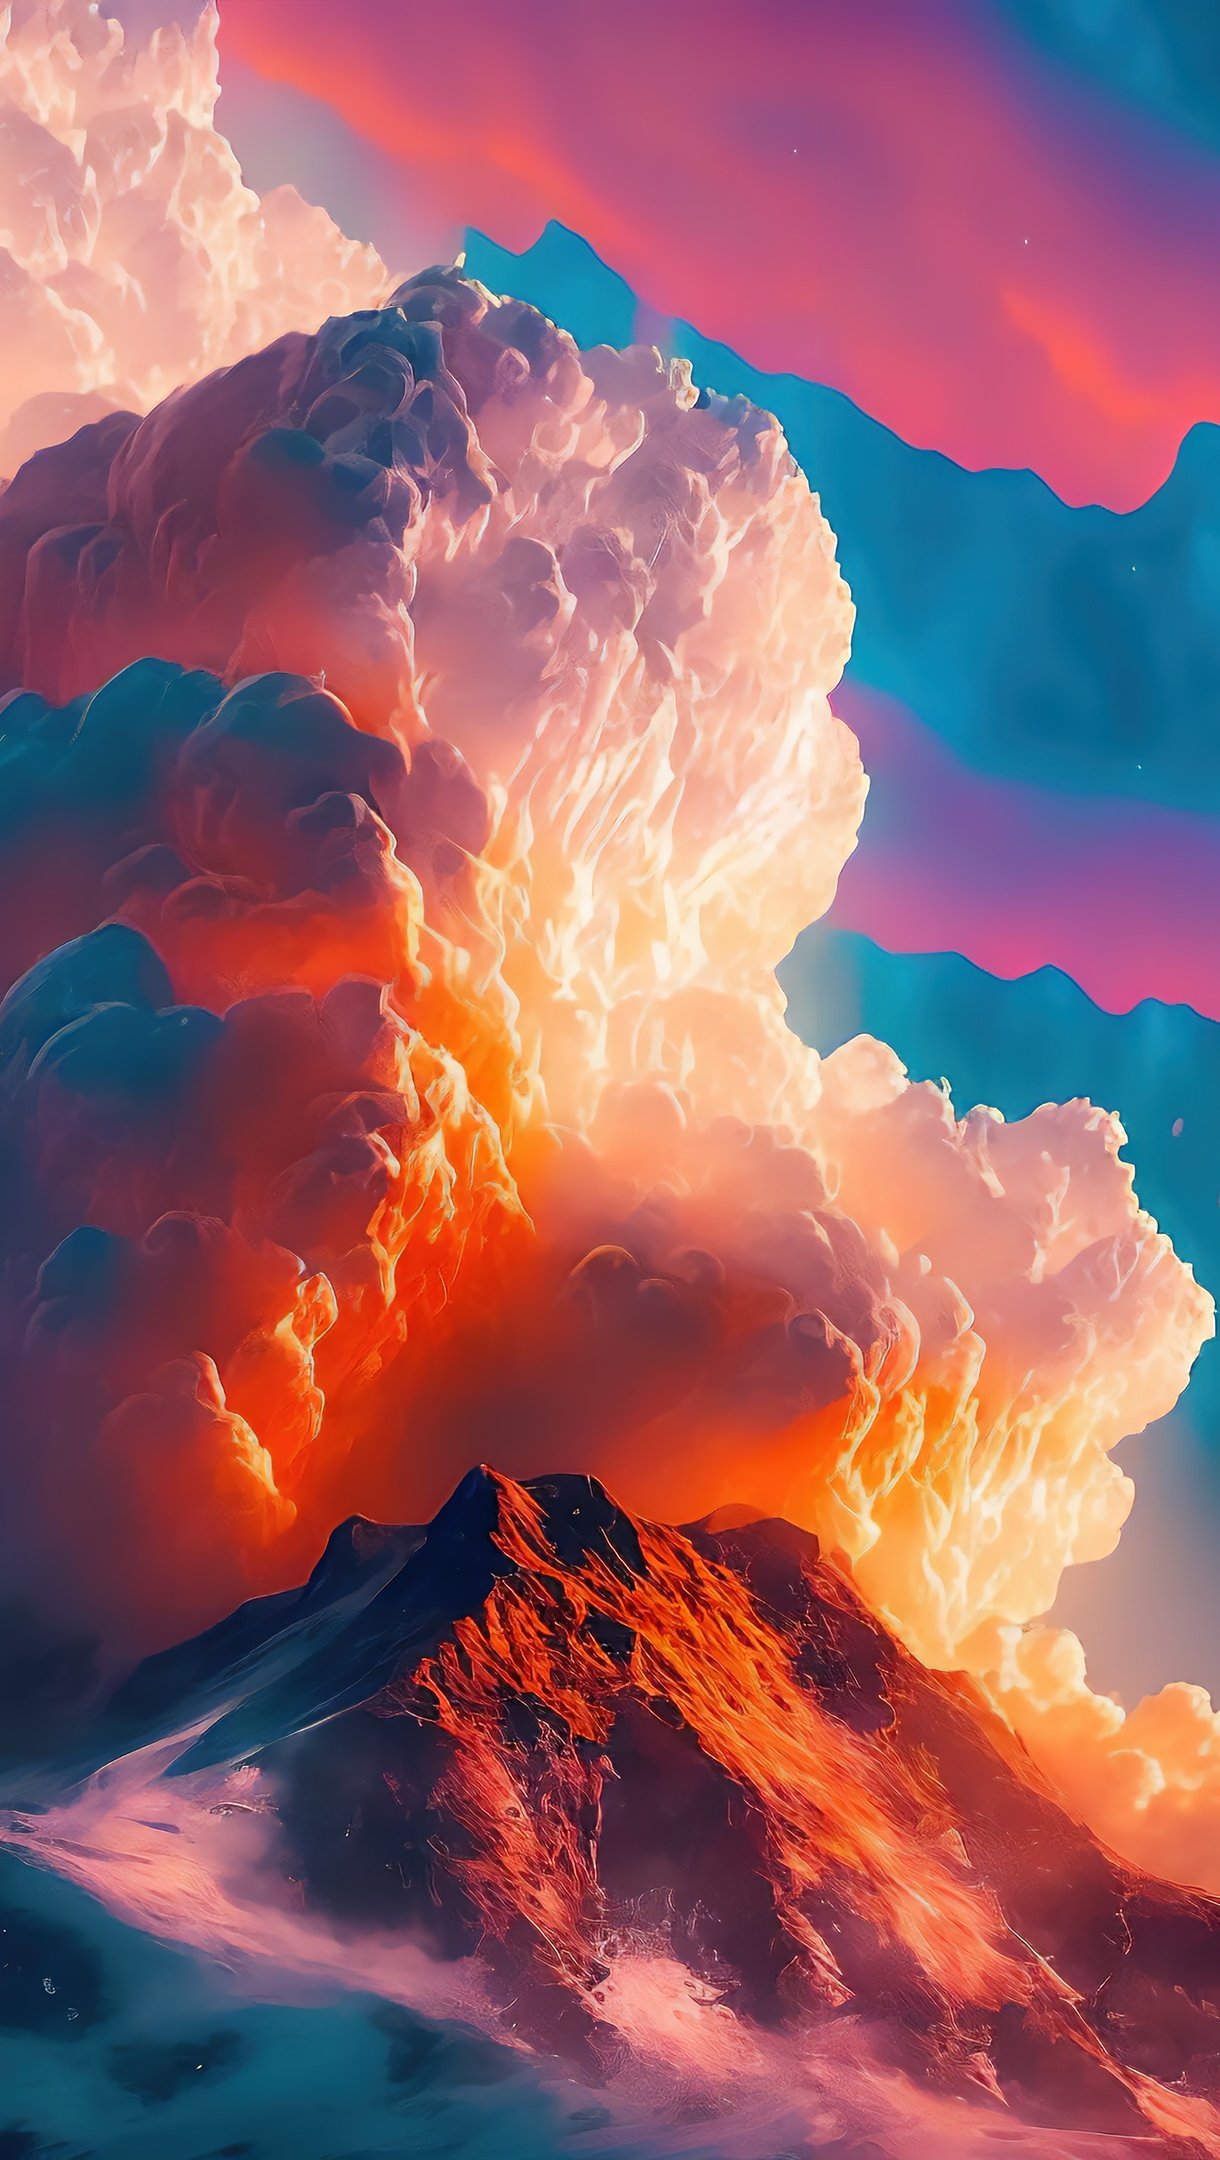 Colorful clouds over mountain Digital Art Wallpaper 4k Ultra HD